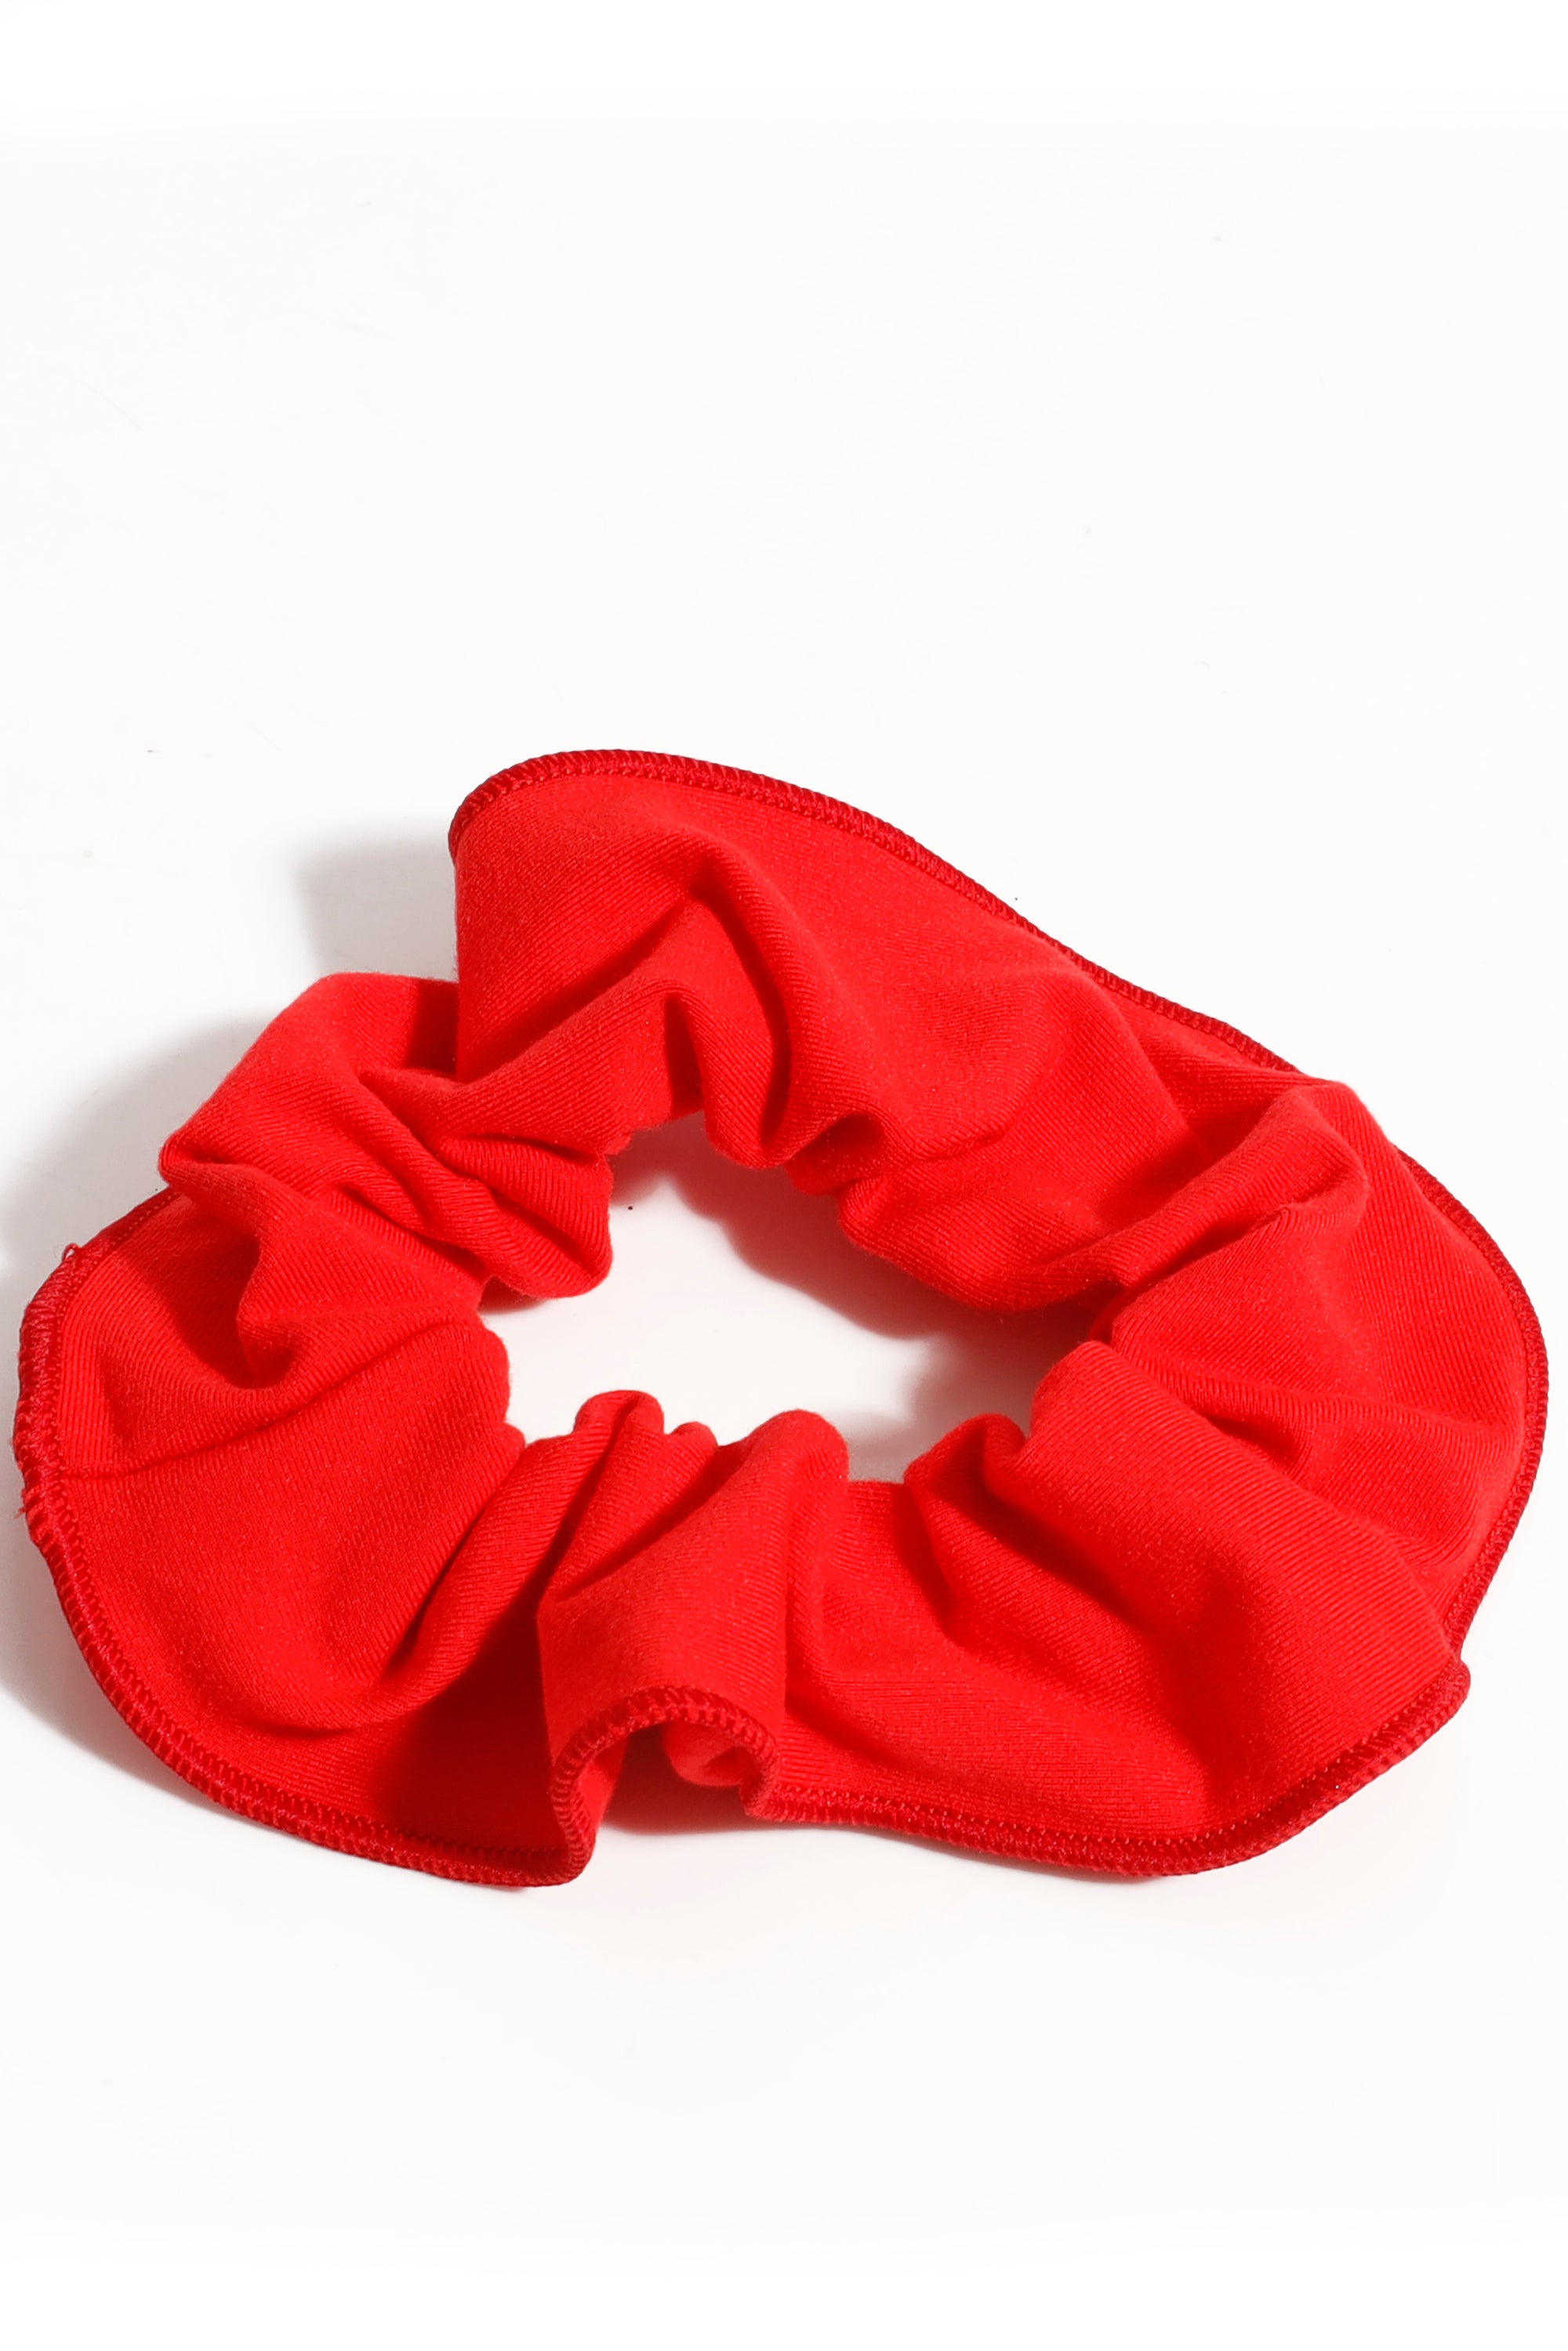 SCRUNCHIES THAT PROMOTE HAIR GROWTH